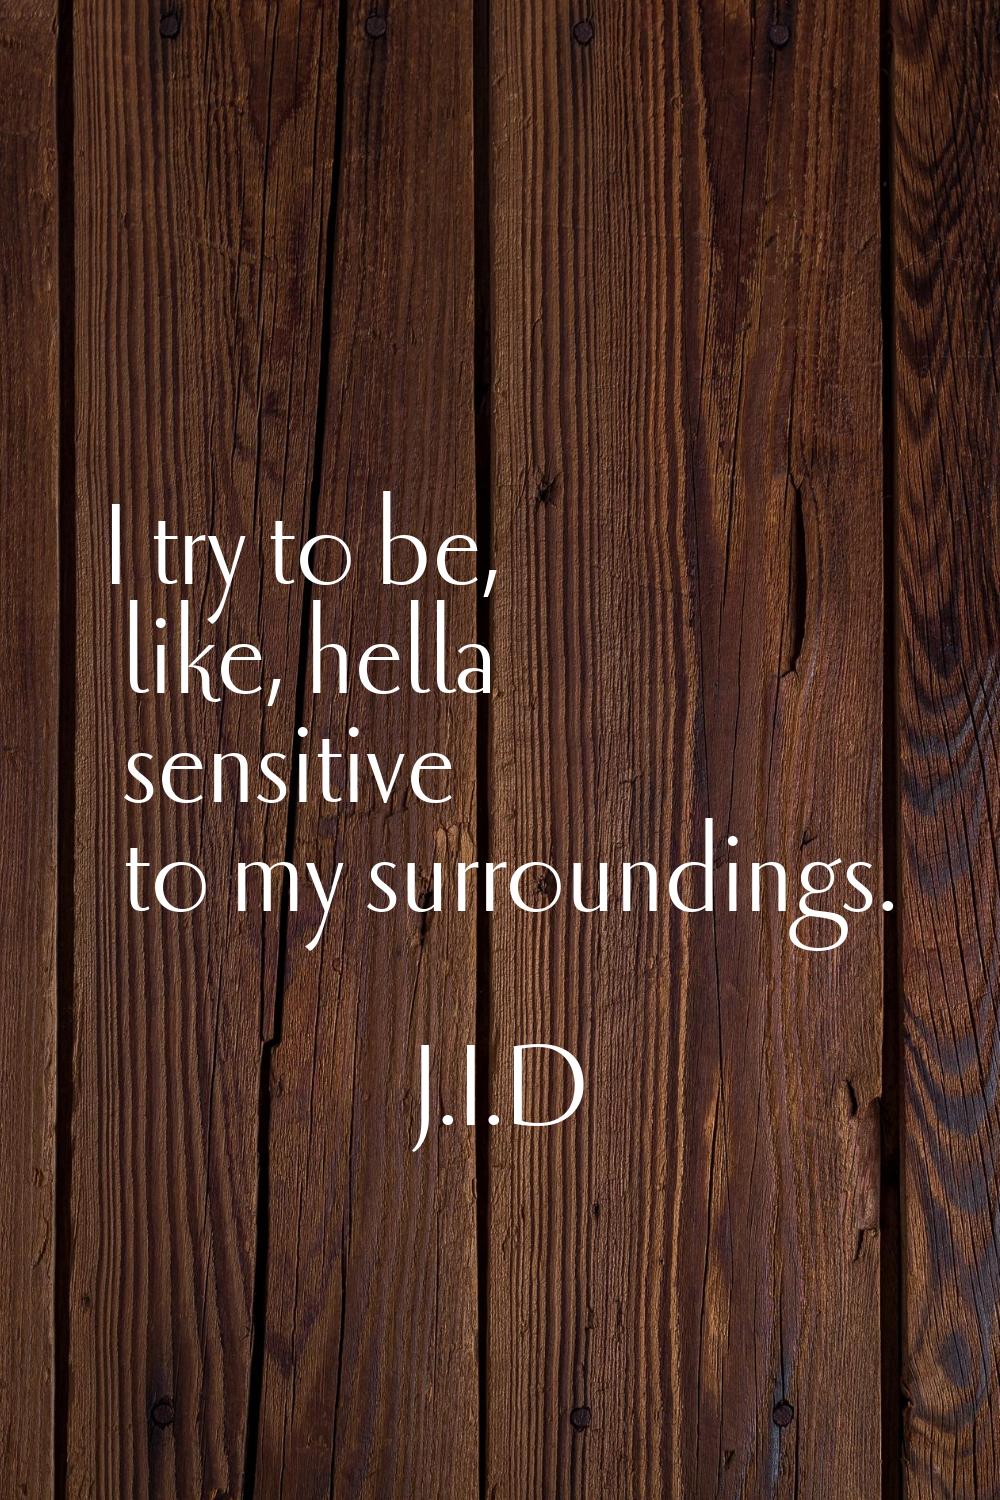 I try to be, like, hella sensitive to my surroundings.